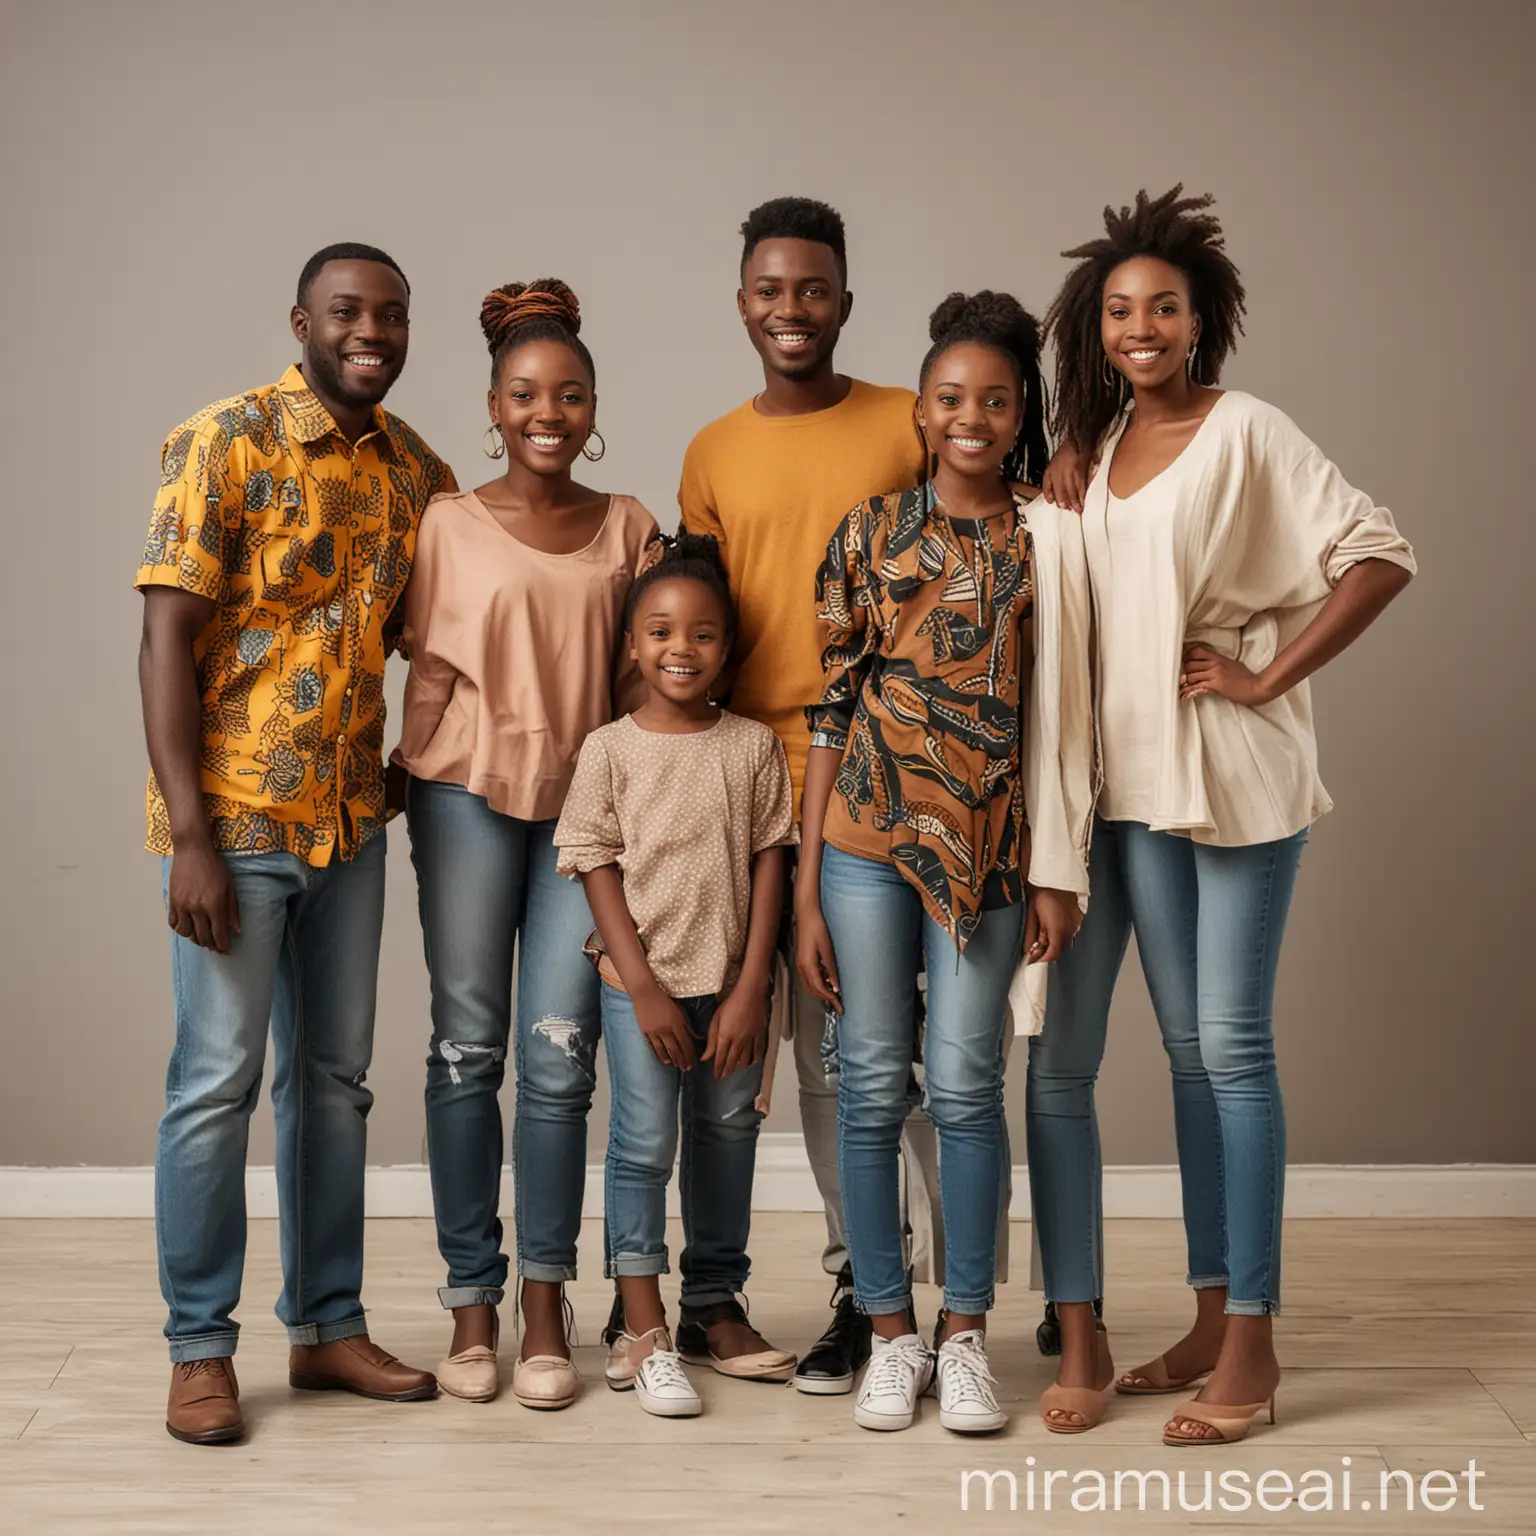 Modern African family with friends standing